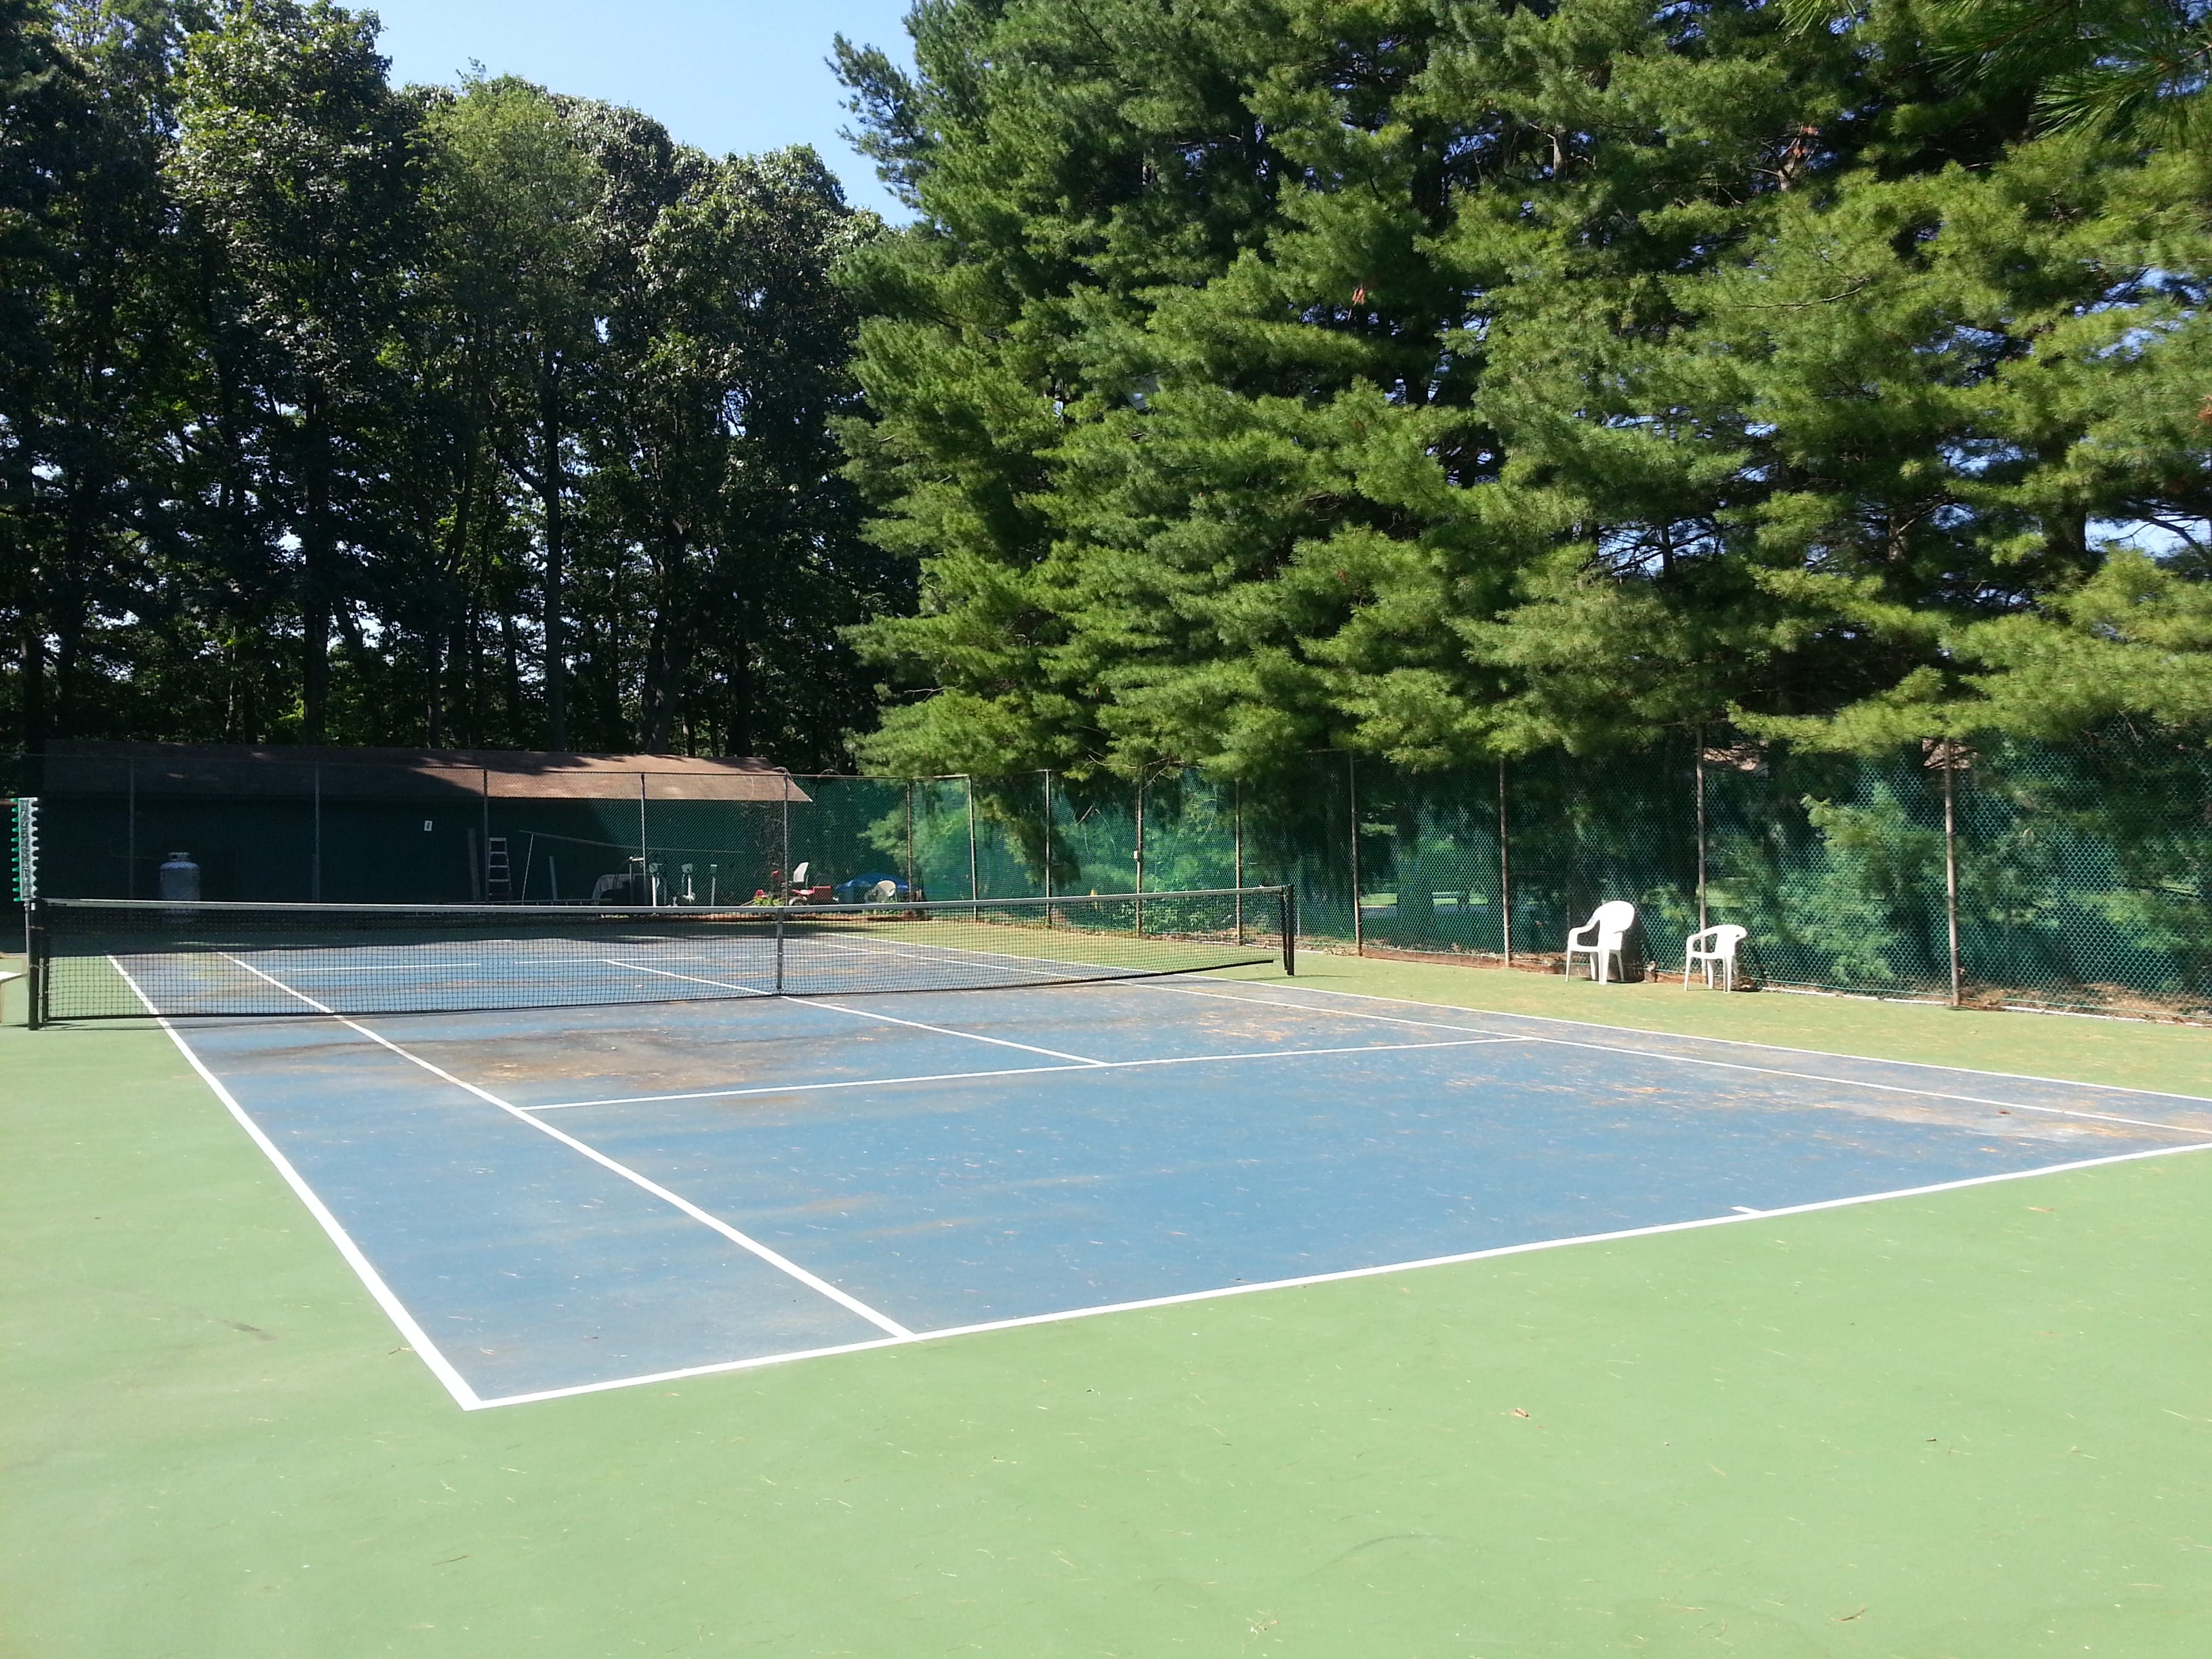 Shadow Lake Village has two tennis courts, pictured here, located near the clubhouse and pool.